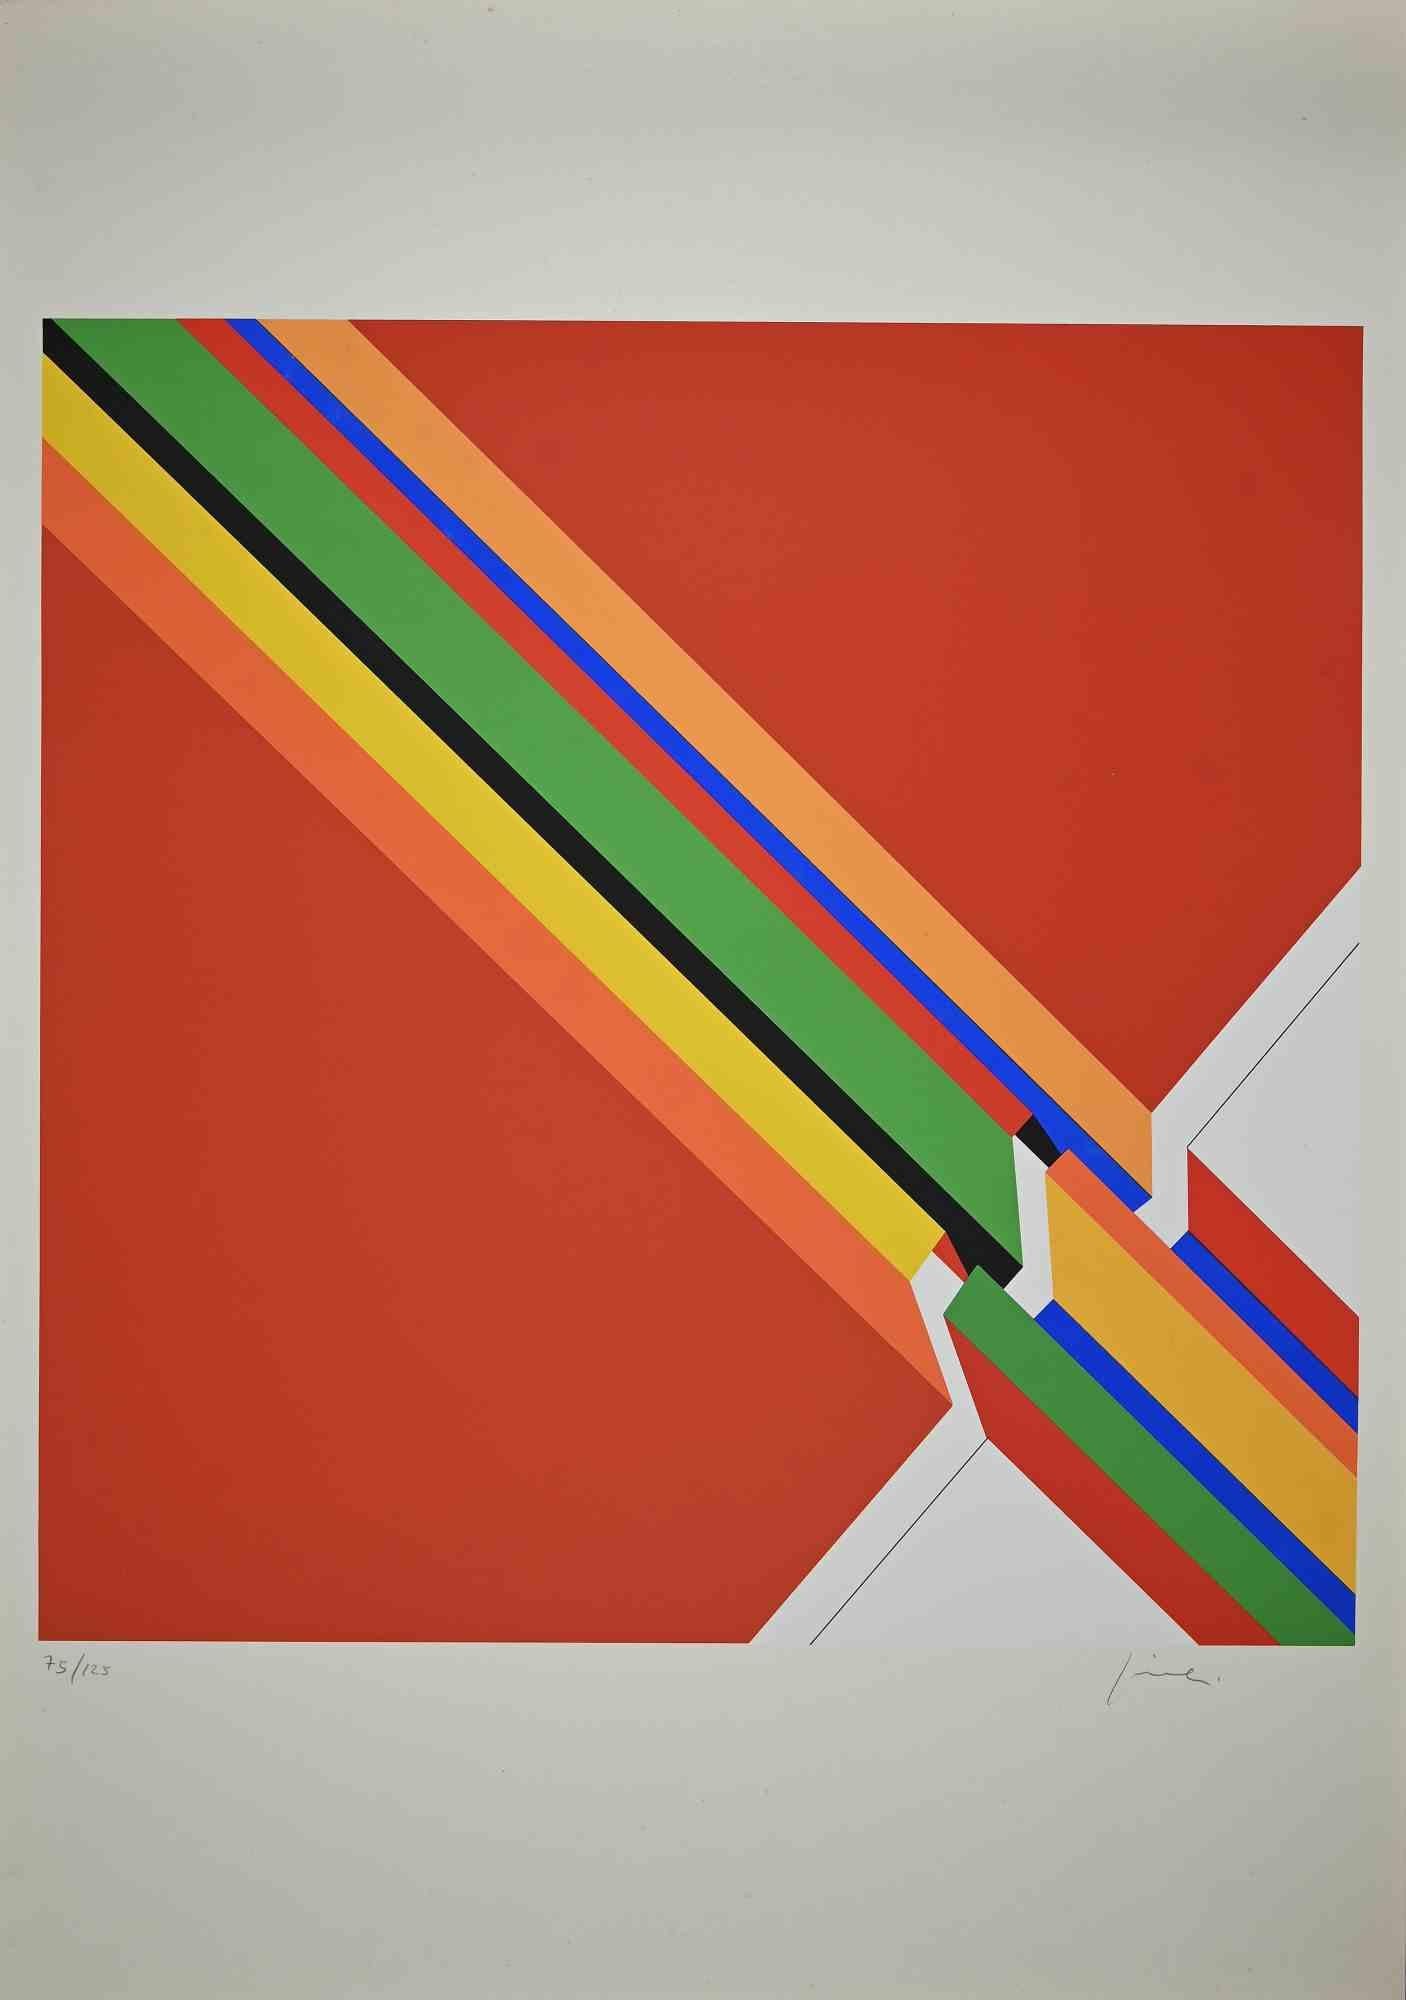 Rainbow Abstract Composition is an original artwork realized in the 1970s by the contemporary artist Franco Giuli (1934-2018)

Mixed colored screen print.

Hand signed by the artist on the lower margin.

Numbered on the lower left. Edition of